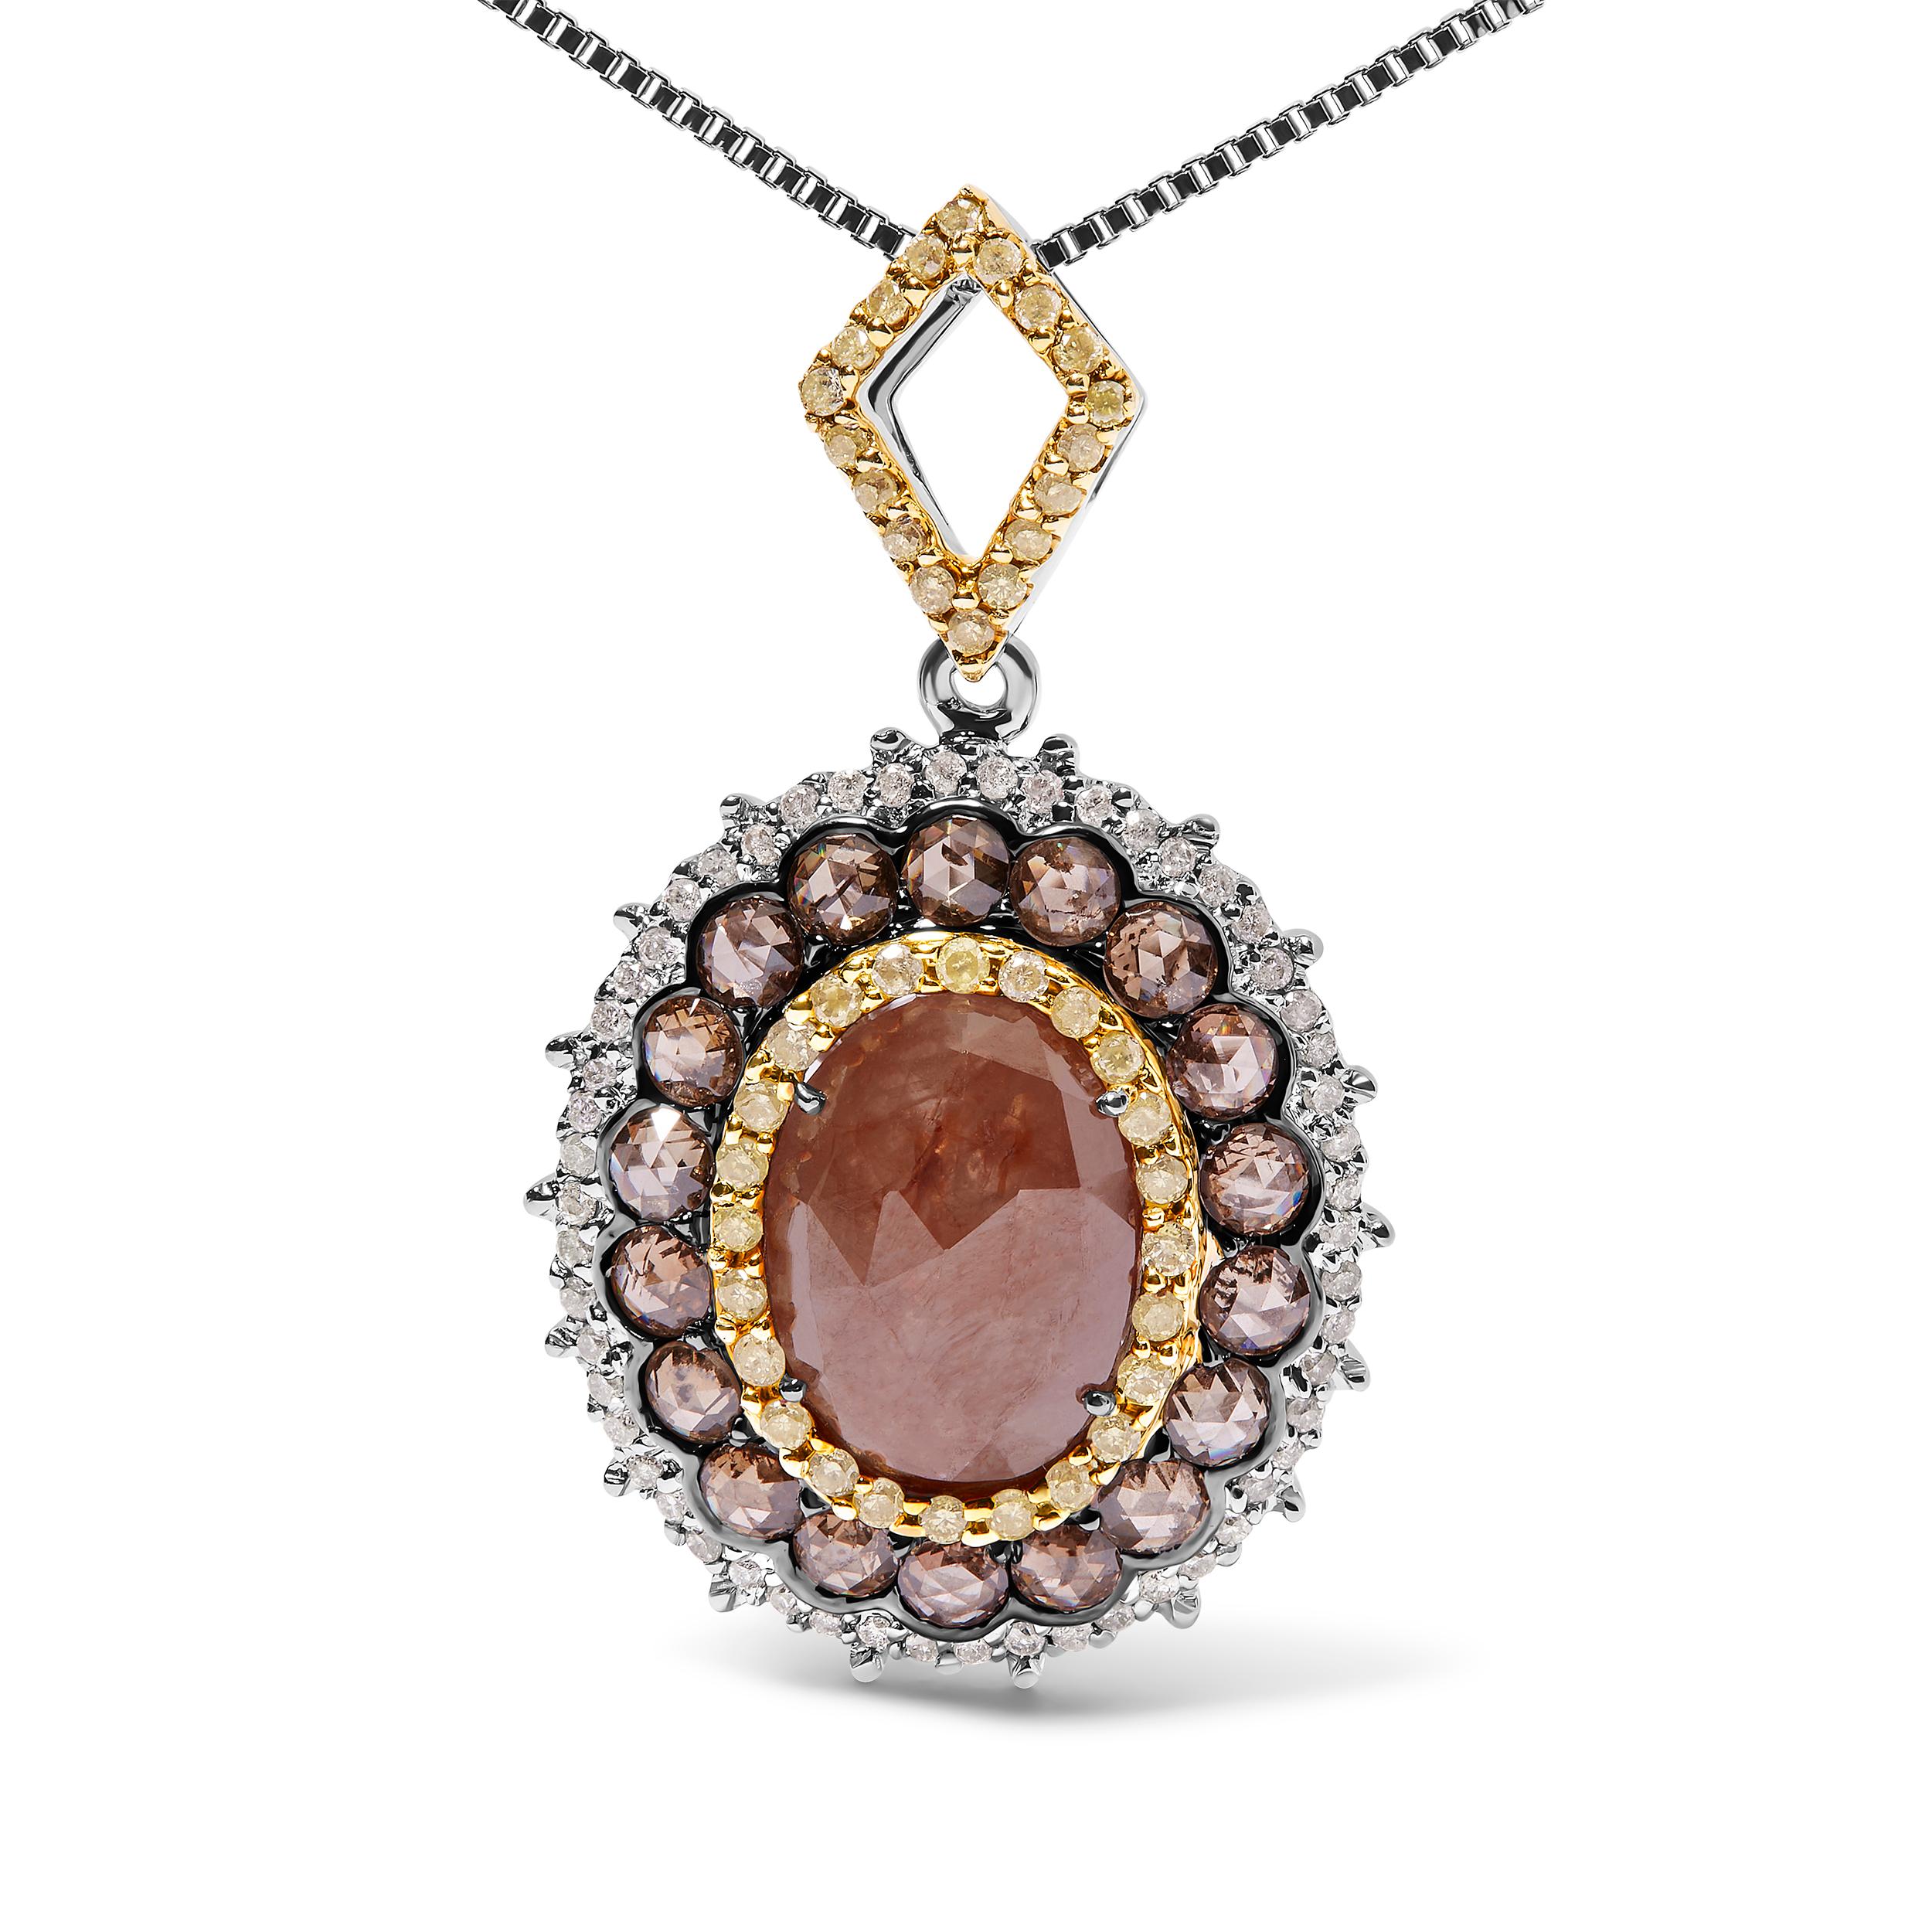 Introducing a mesmerizing masterpiece that encapsulates elegance and allure. Crafted in 14K white gold, this pendant necklace features a remarkable 3.00 carat total weight of rose cut fancy colored diamonds. A triple halo design embraces the